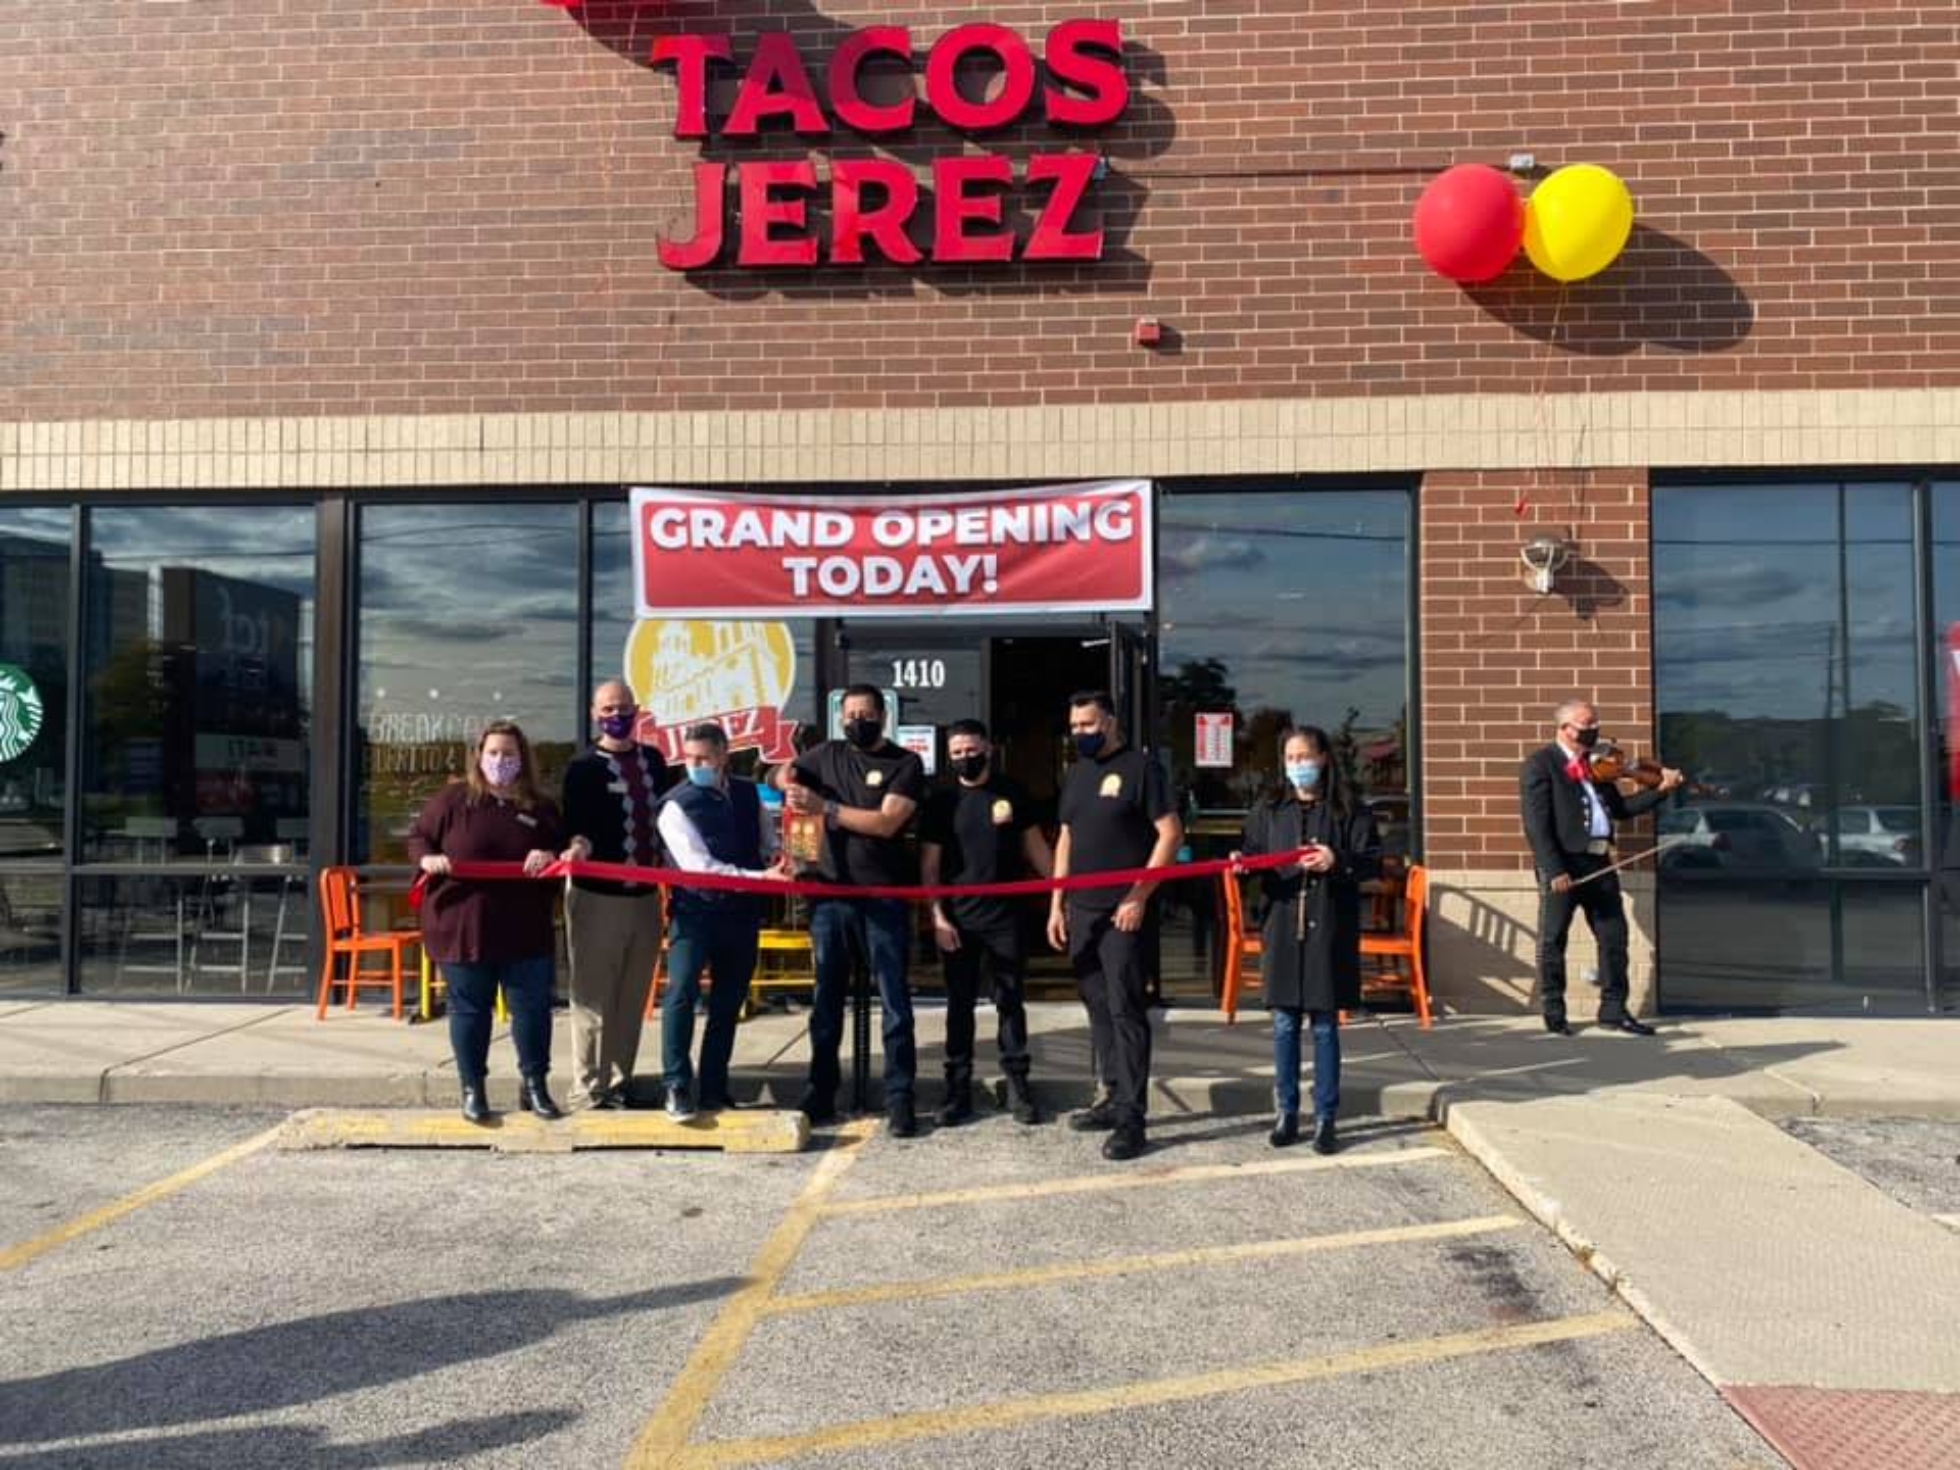 Tacos Jerez, which operates locations in Elgin and Rolling Meadows (pictured), hopes to reoccupy the former Burger King building in Huntley